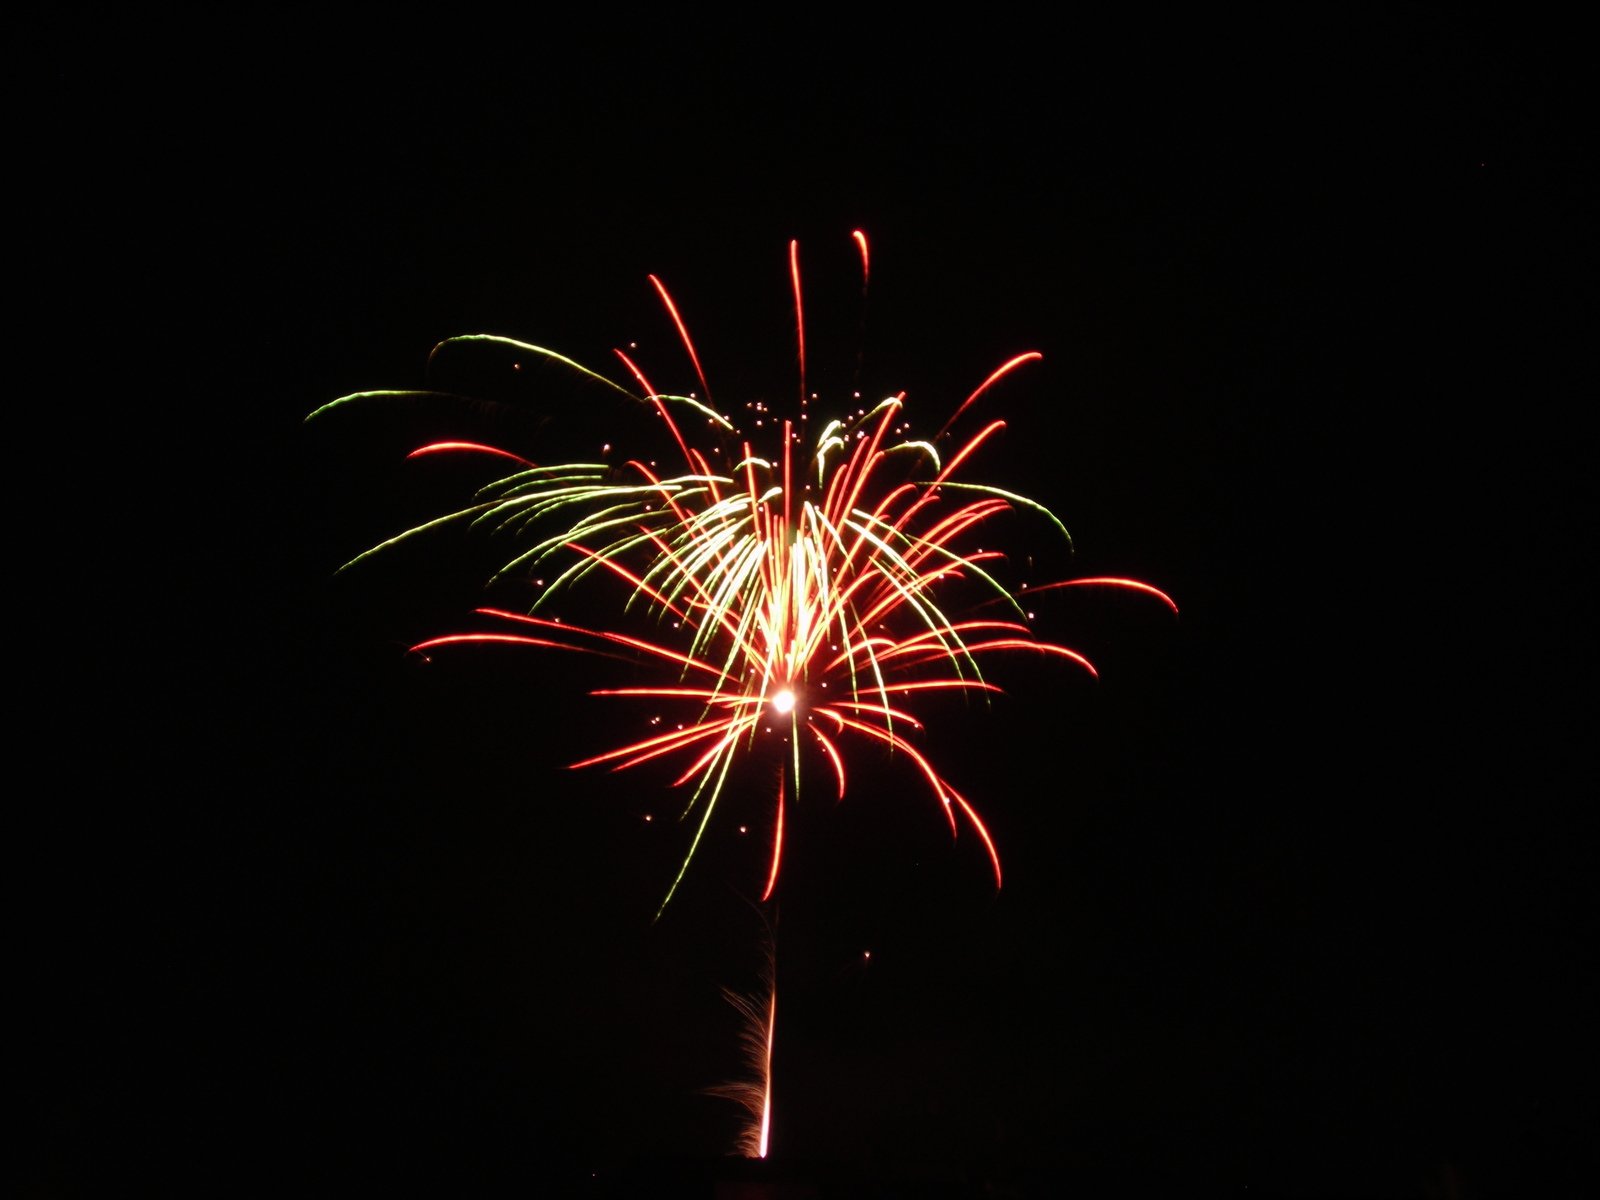 a fireworks in the night sky with dark background